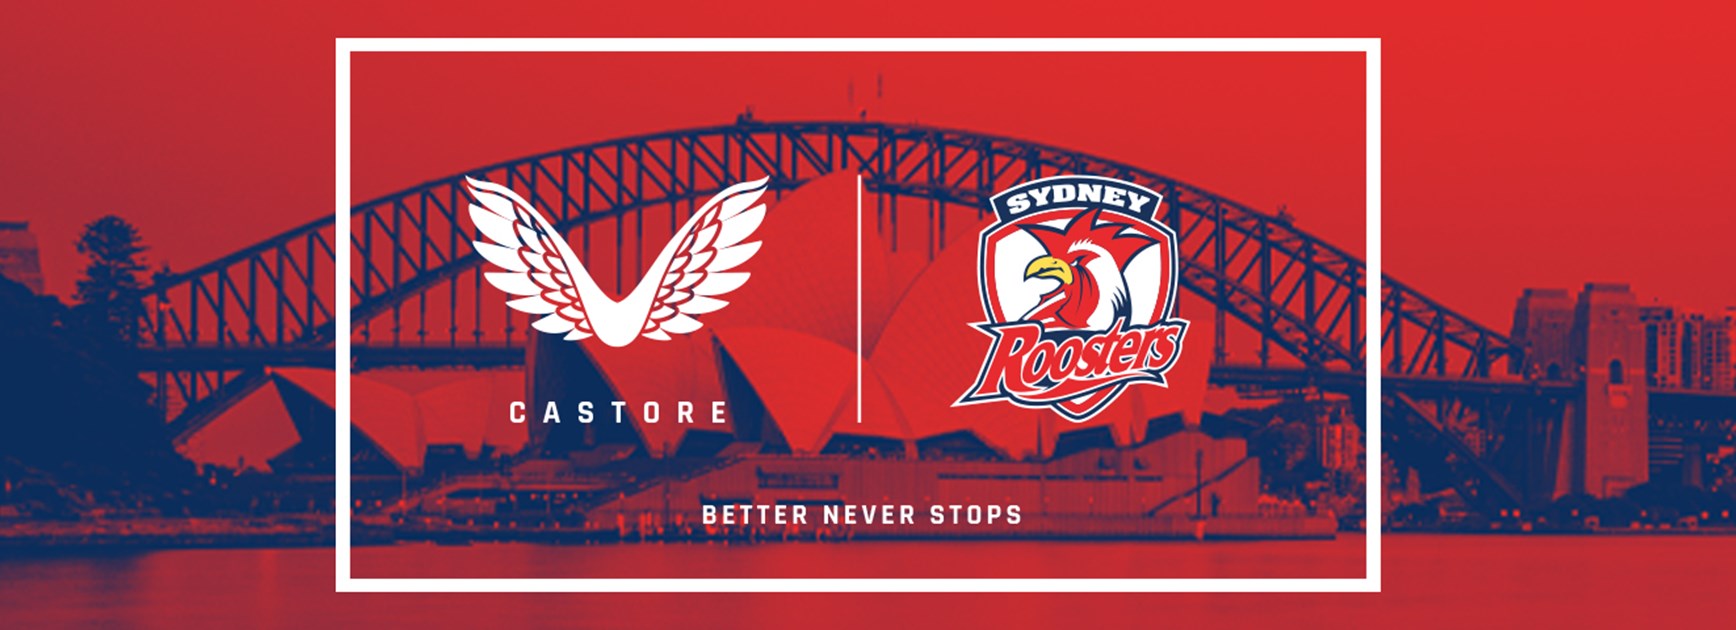 Sydney Roosters partner with premium sportswear brand Castore